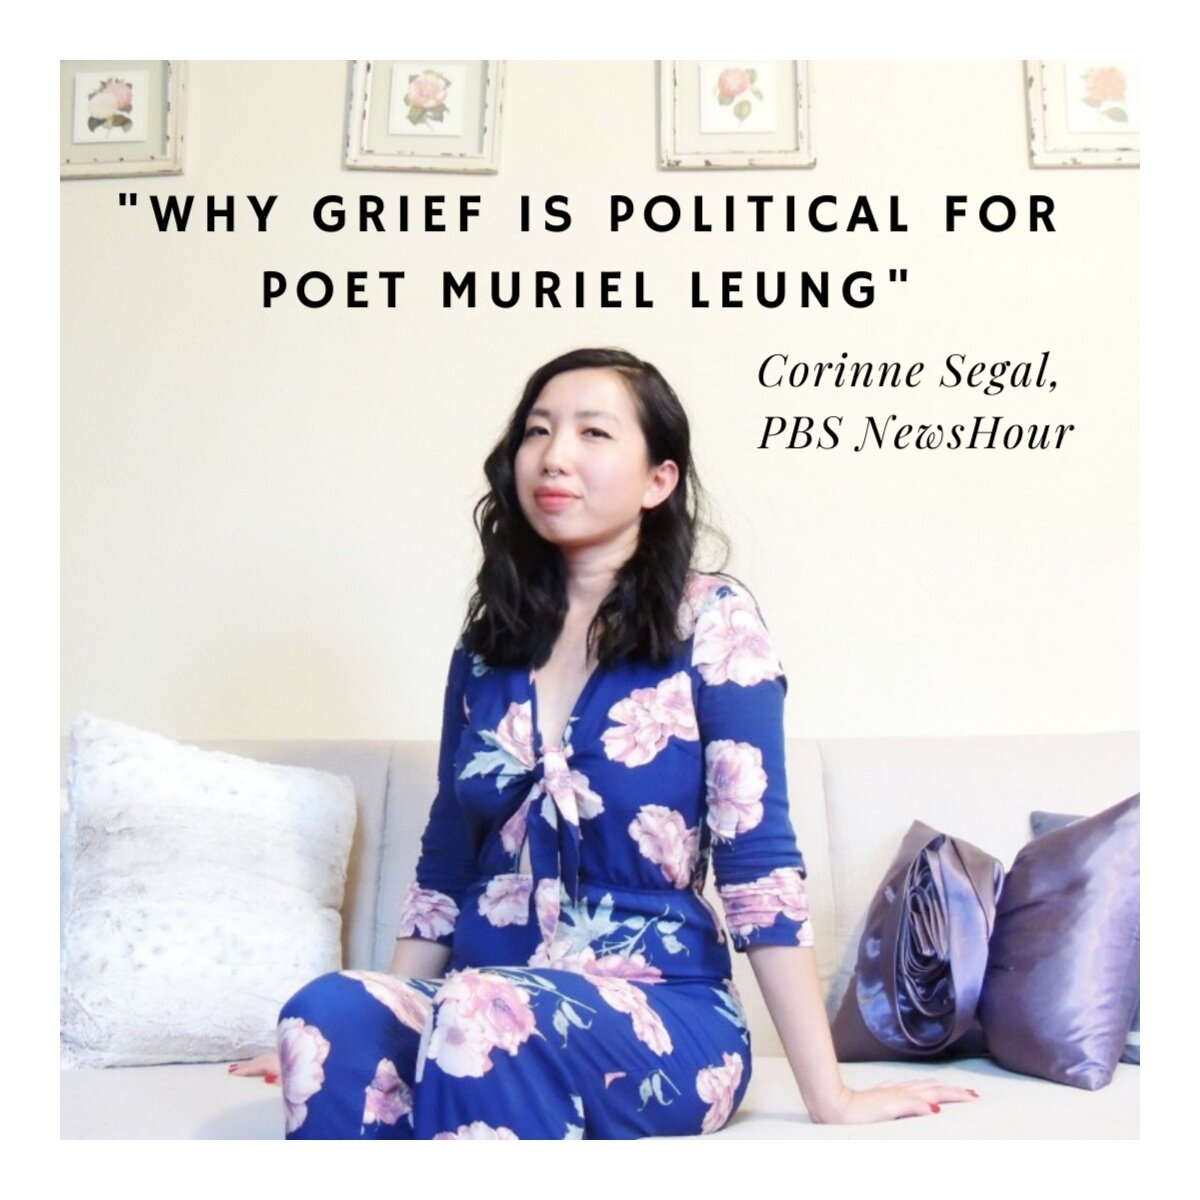 _why+grief+is+political+for+poet+muriel+leung_.jpg